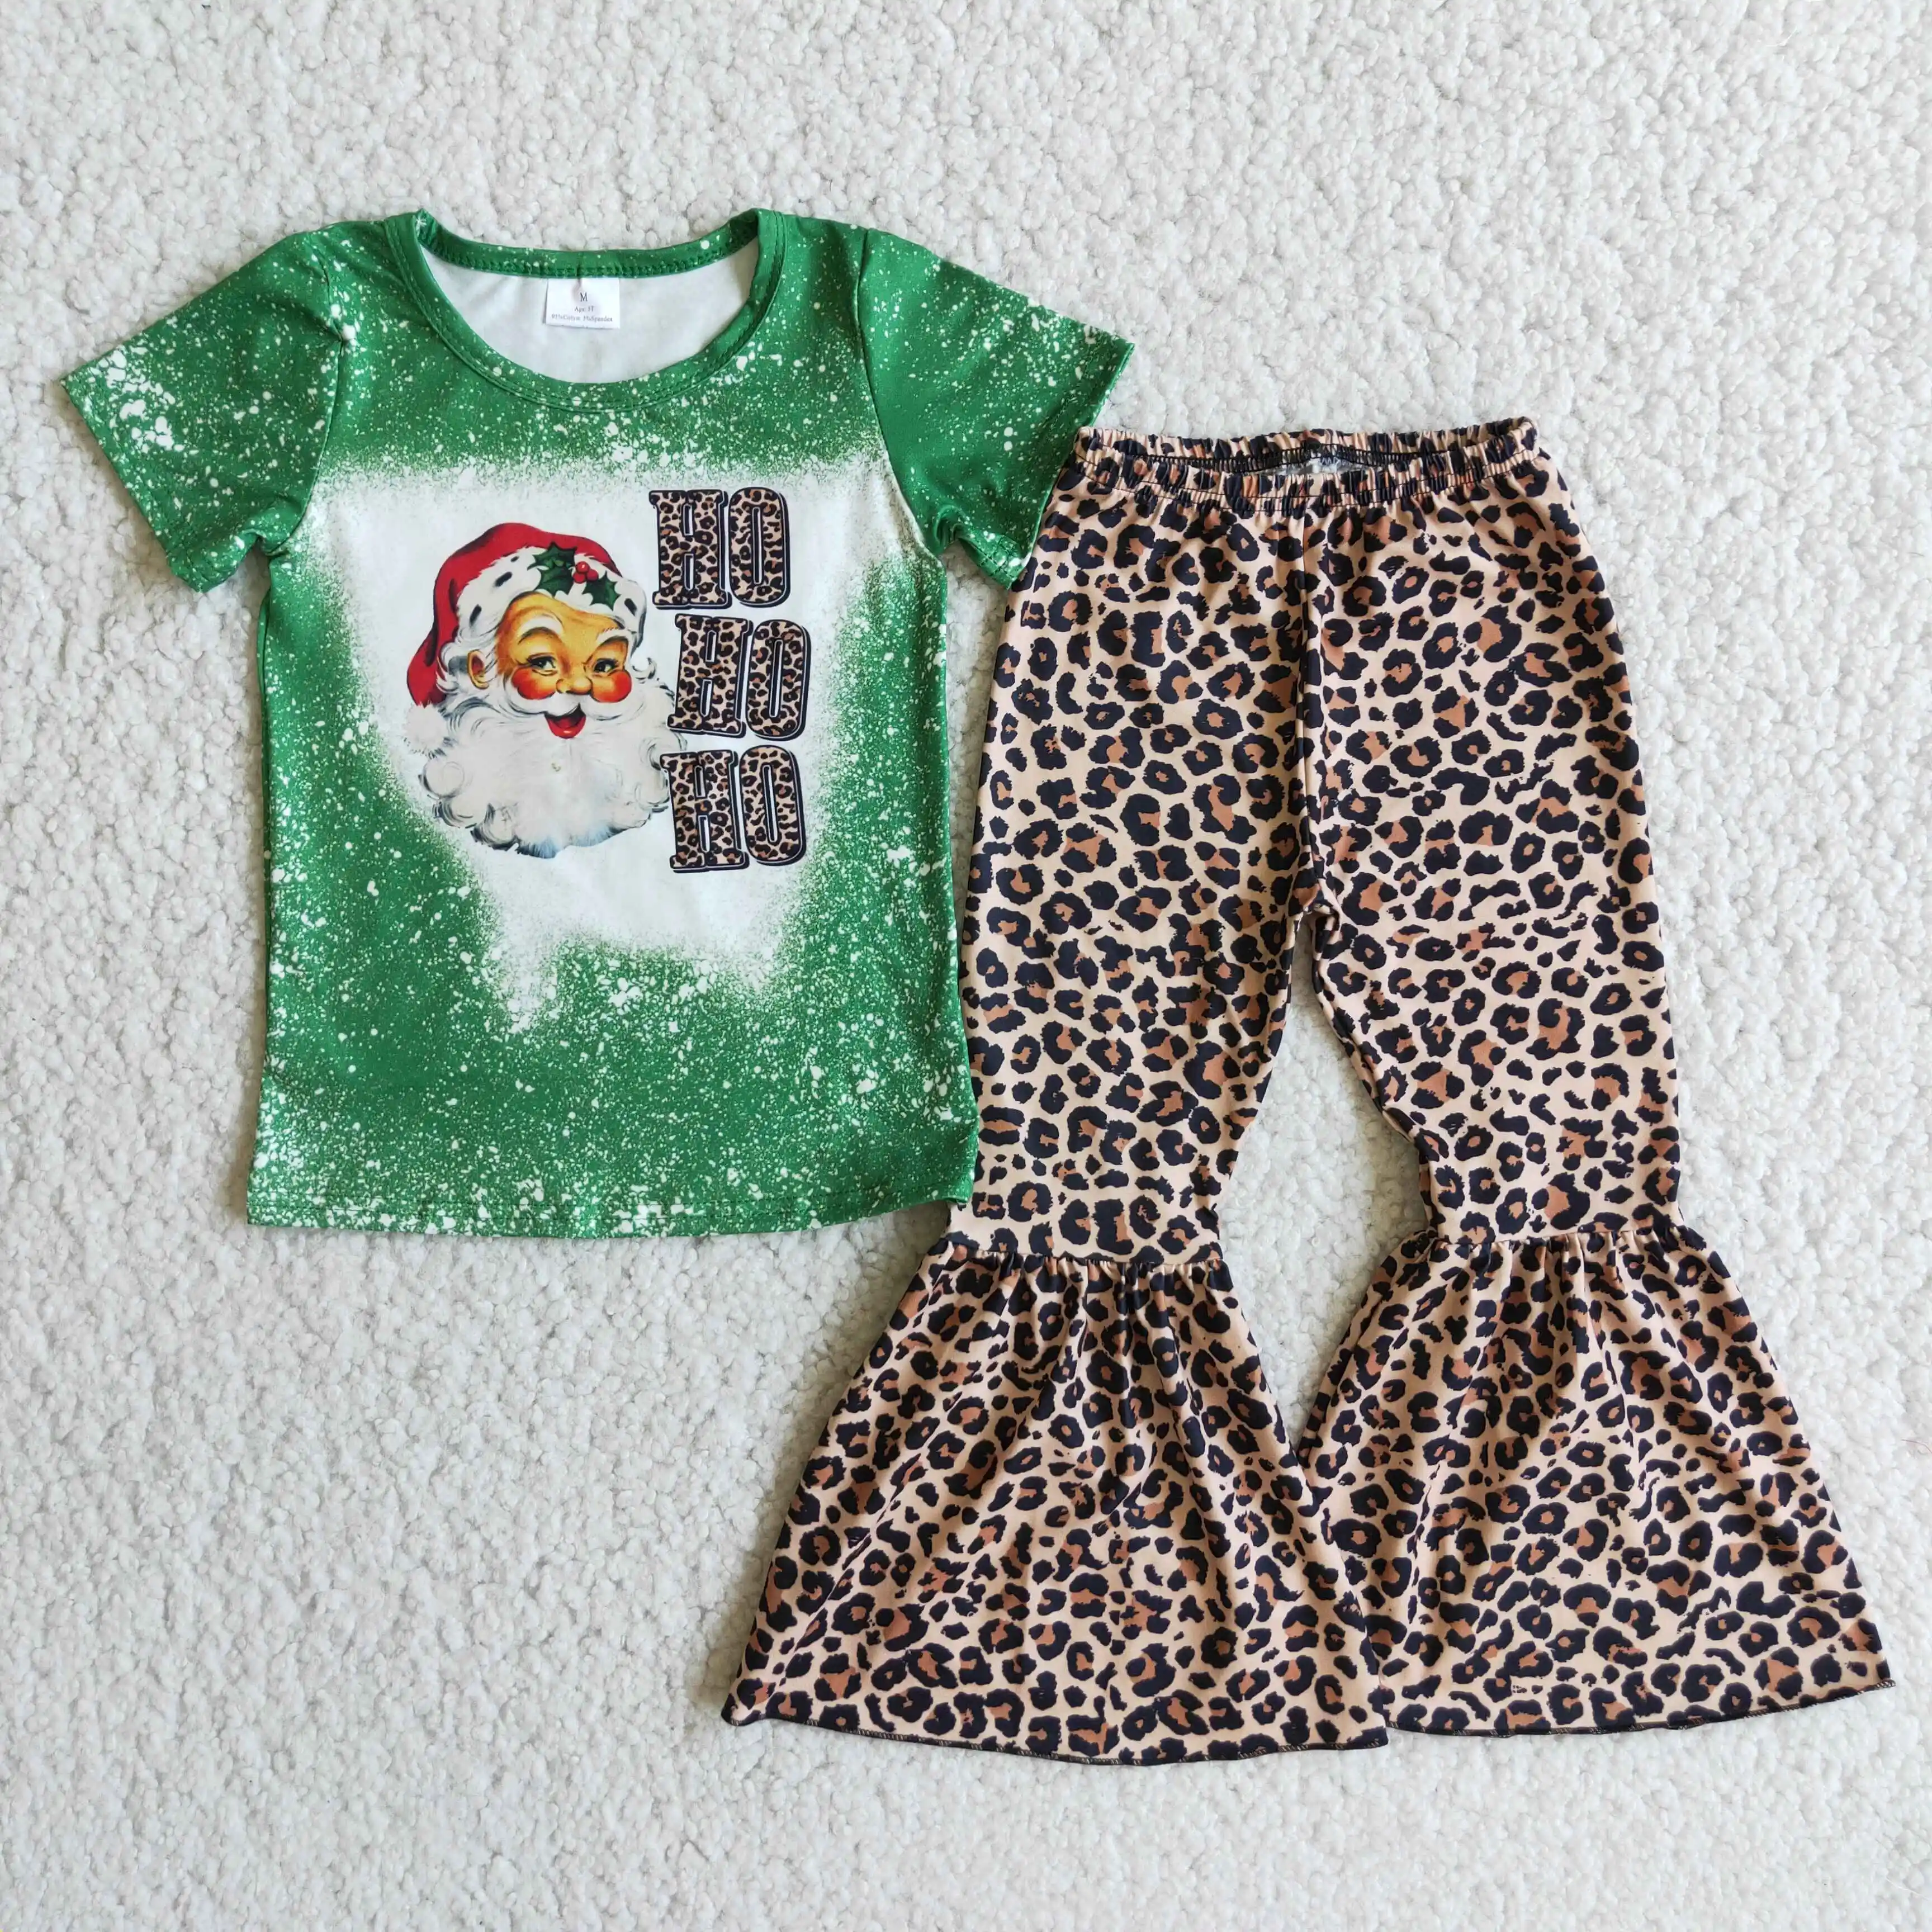 RTS Children's Girls Christmas New Style Green Short Sleeve Shirt Santa Print Leopard Flared Pants Baby Boutique Clothes